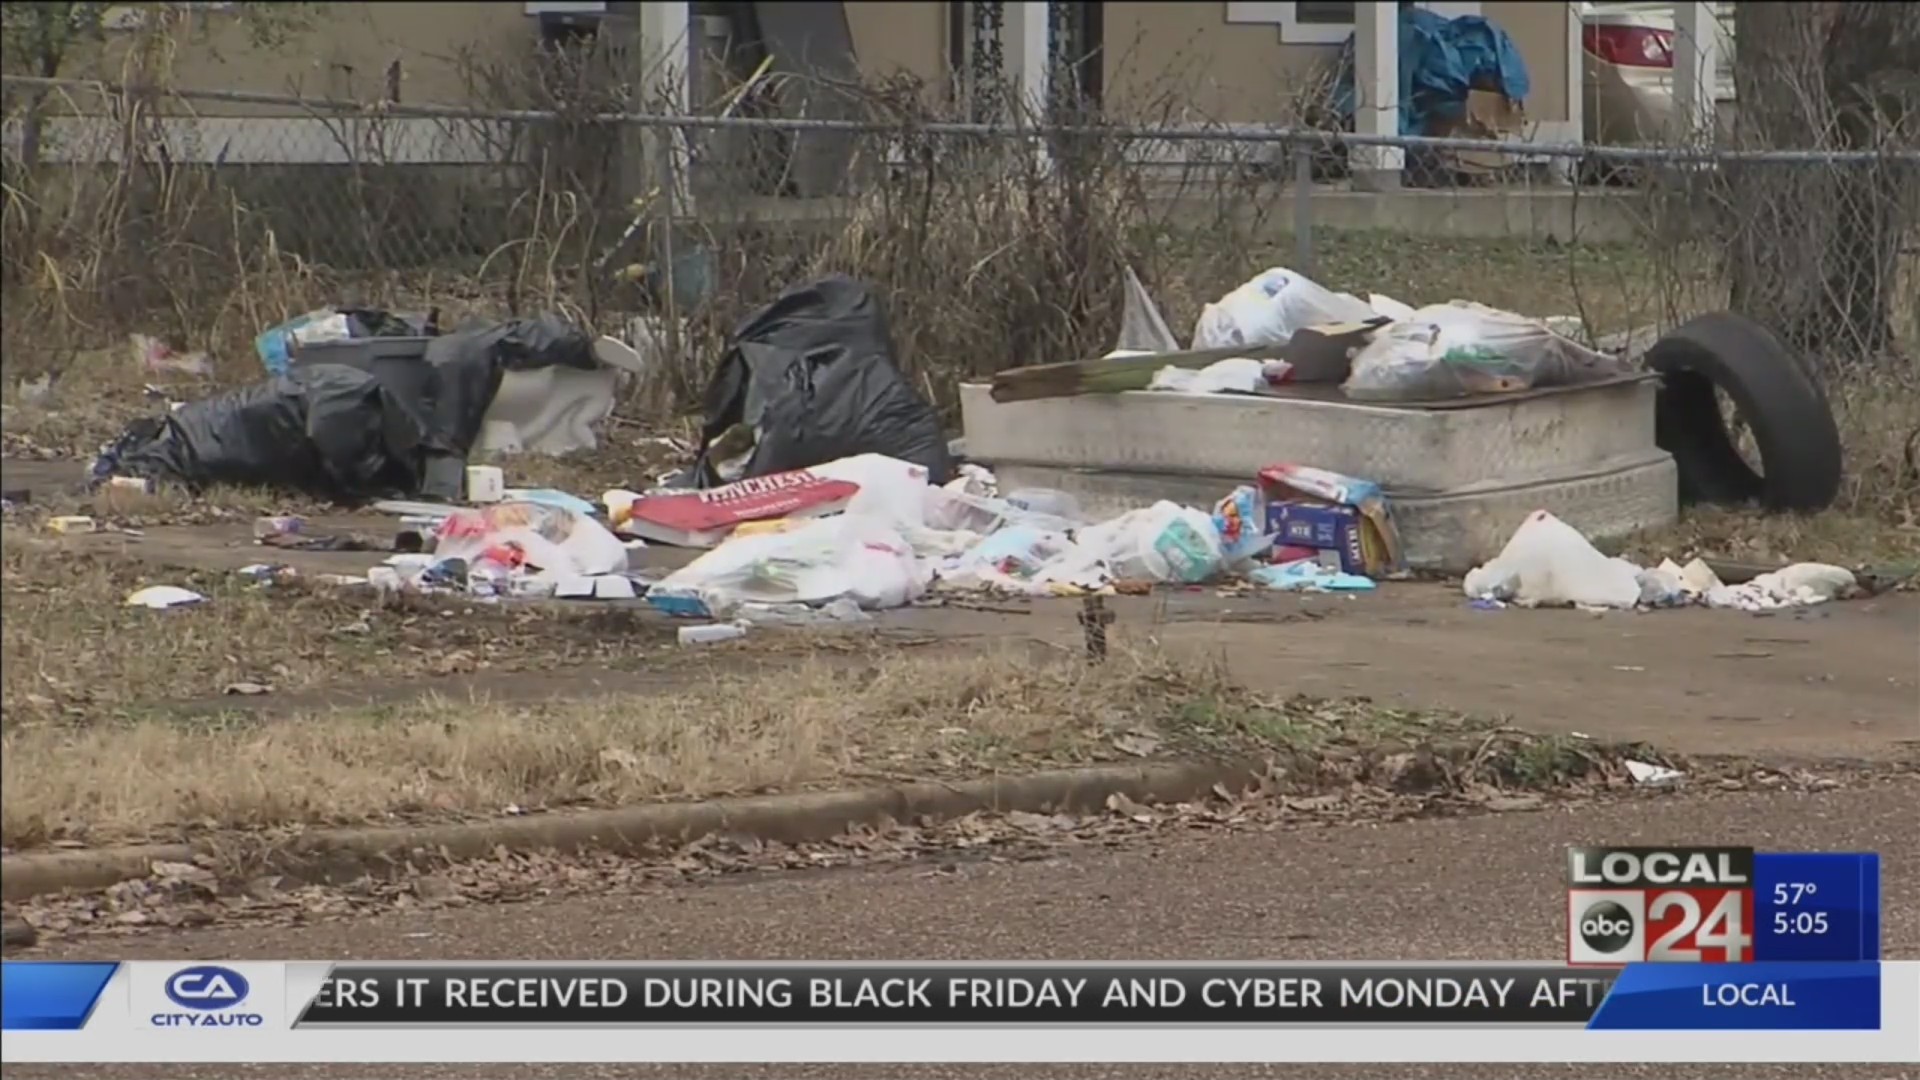 Northaven is center of a major plan that will clean up the community once and for all